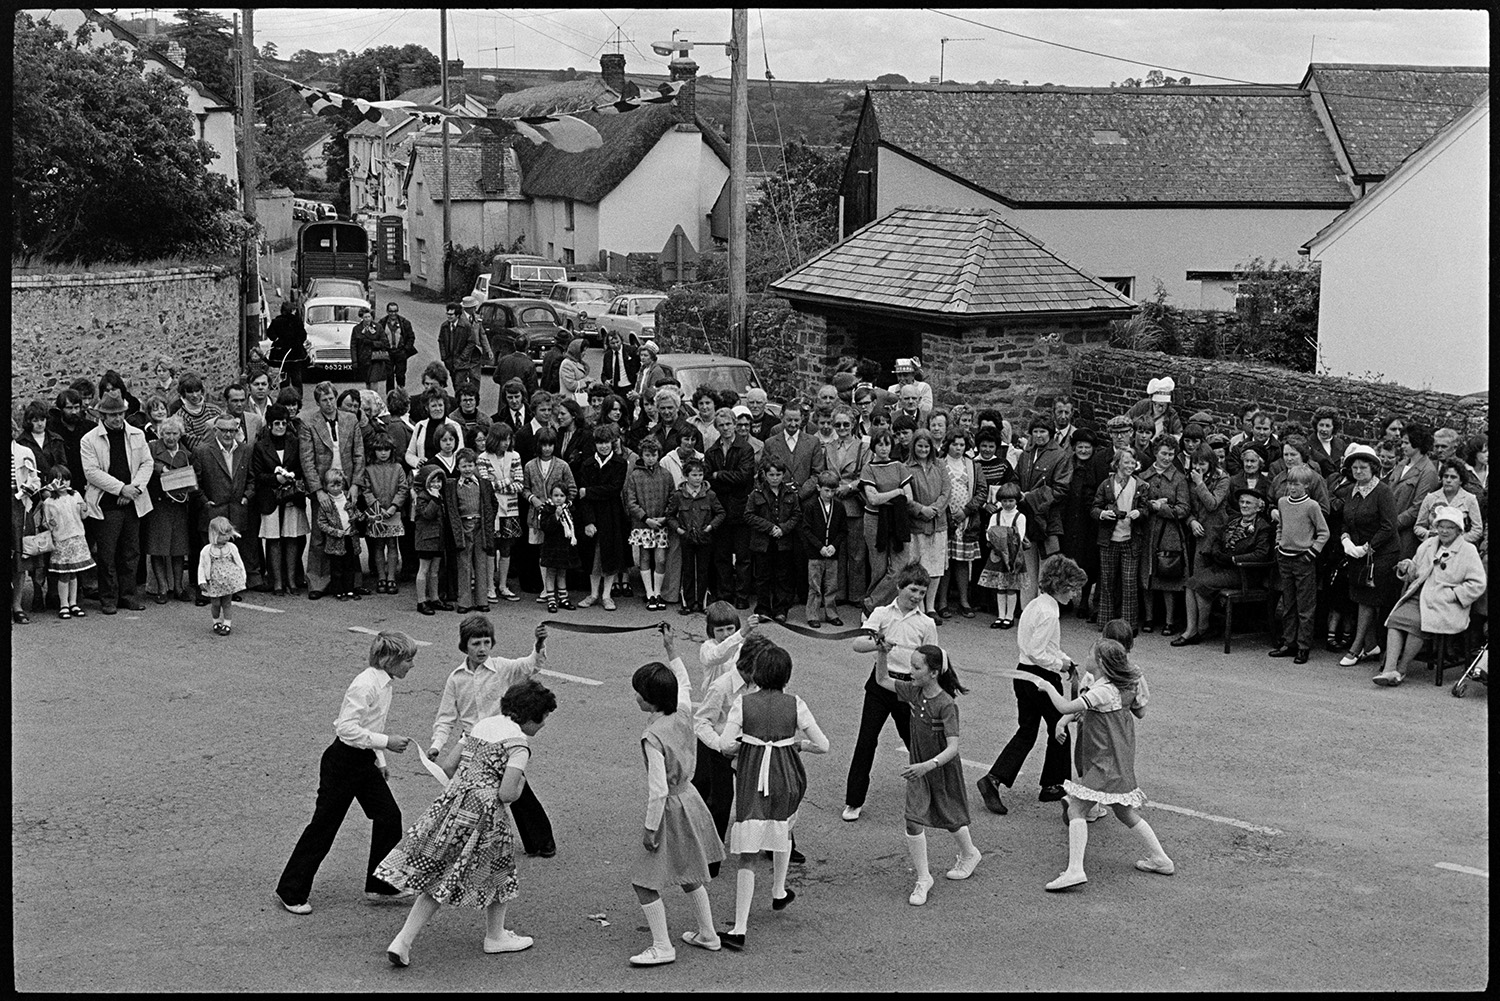 Children dancing in square, Jubilee Day. 
[Children performing a dance with ribbons in Dolton village square on the Silver Jubilee of Queen Elizabeth II. A crowd of people, stood in front of a bus shelter, are watching them. The street in the background is decorated with flags.]